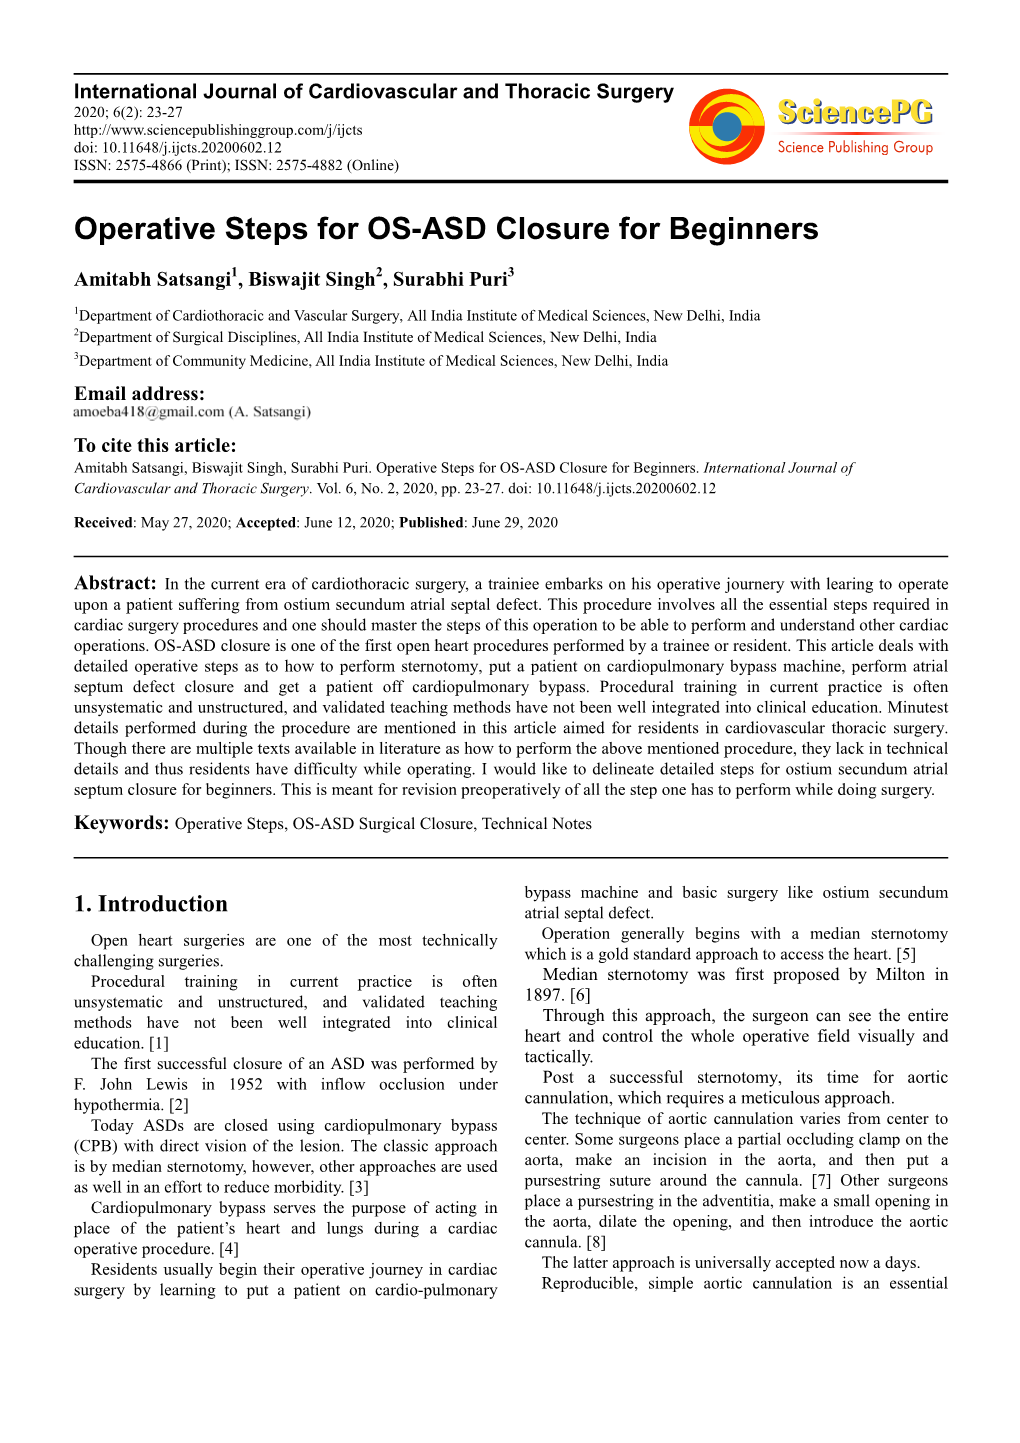 Operative Steps for OS-ASD Closure for Beginners